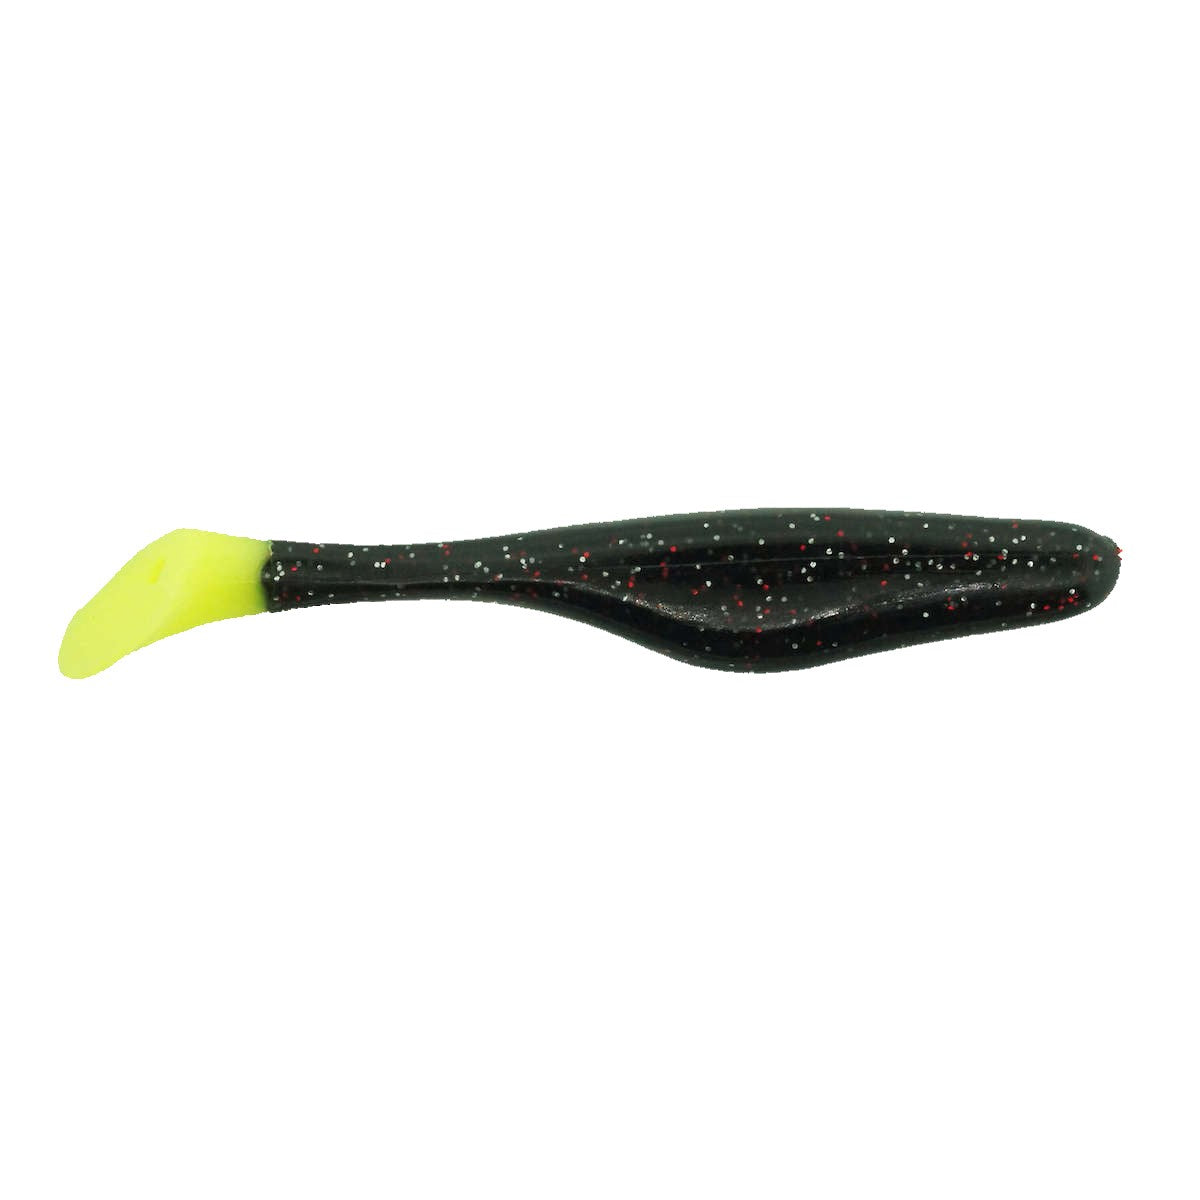 Sea Shad - 4″ Lure Bass Assassin Lures Morning Glory Chartreuse 